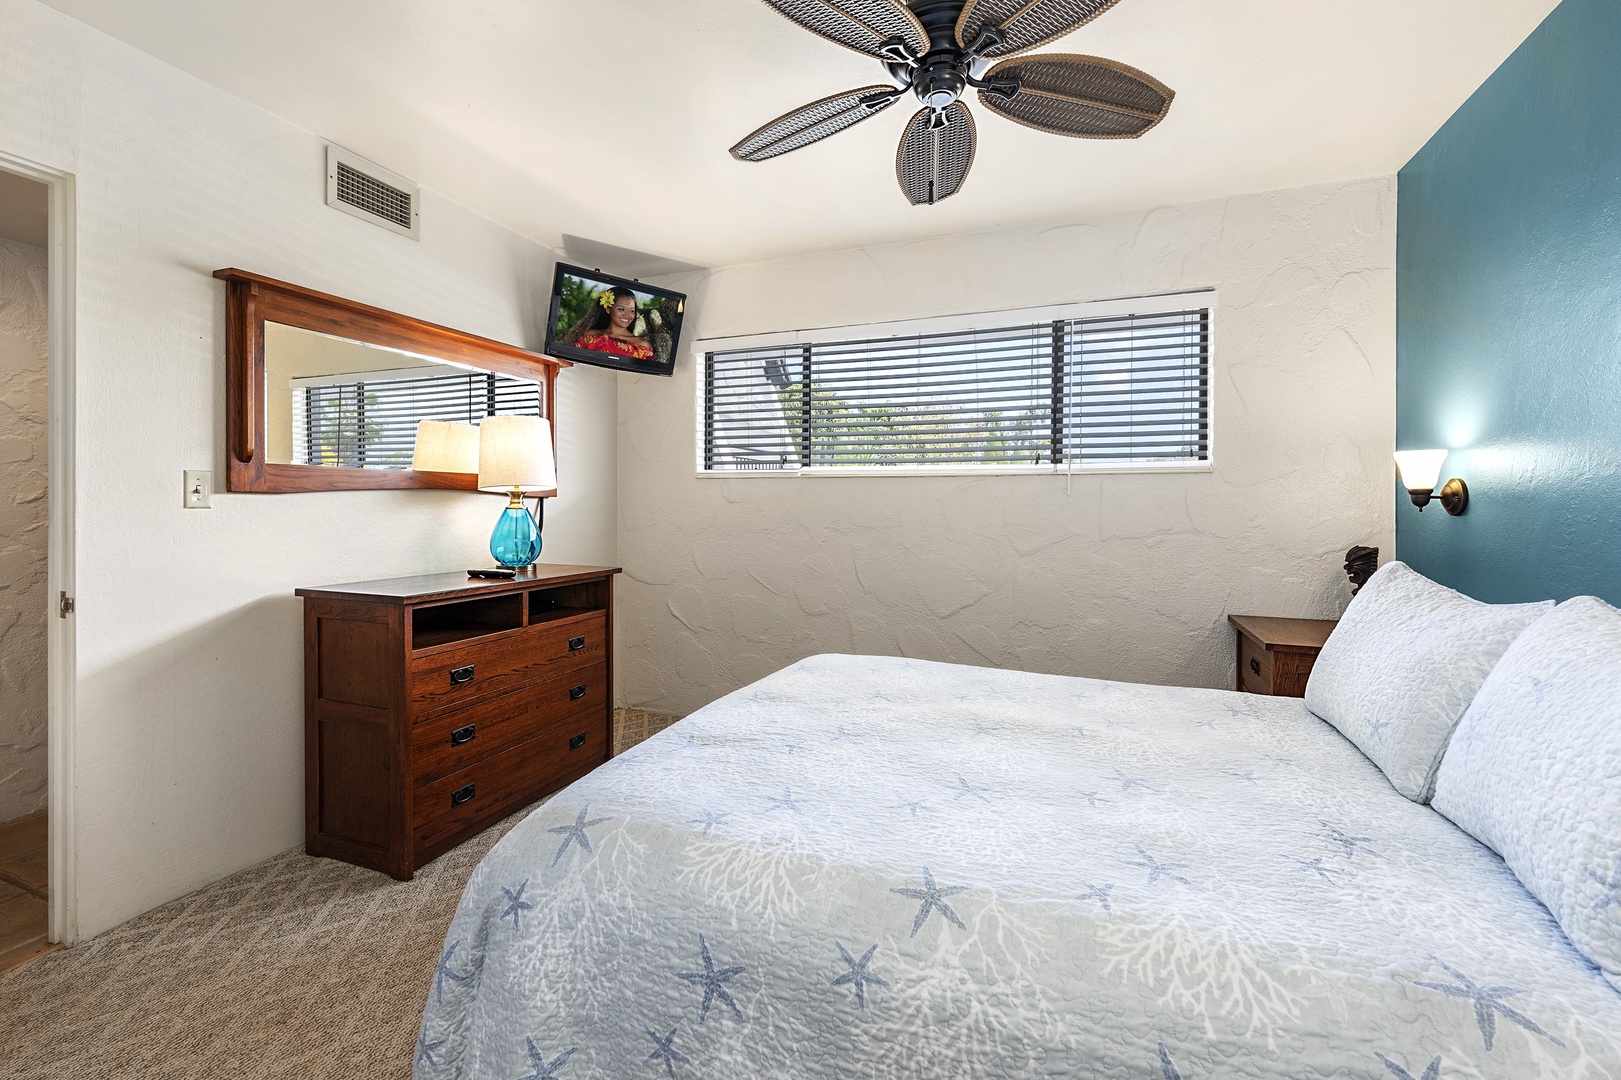 Kailua Kona Vacation Rentals, Casa De Emdeko 222 - Cable TV & Central A/C are two of the features in this unit